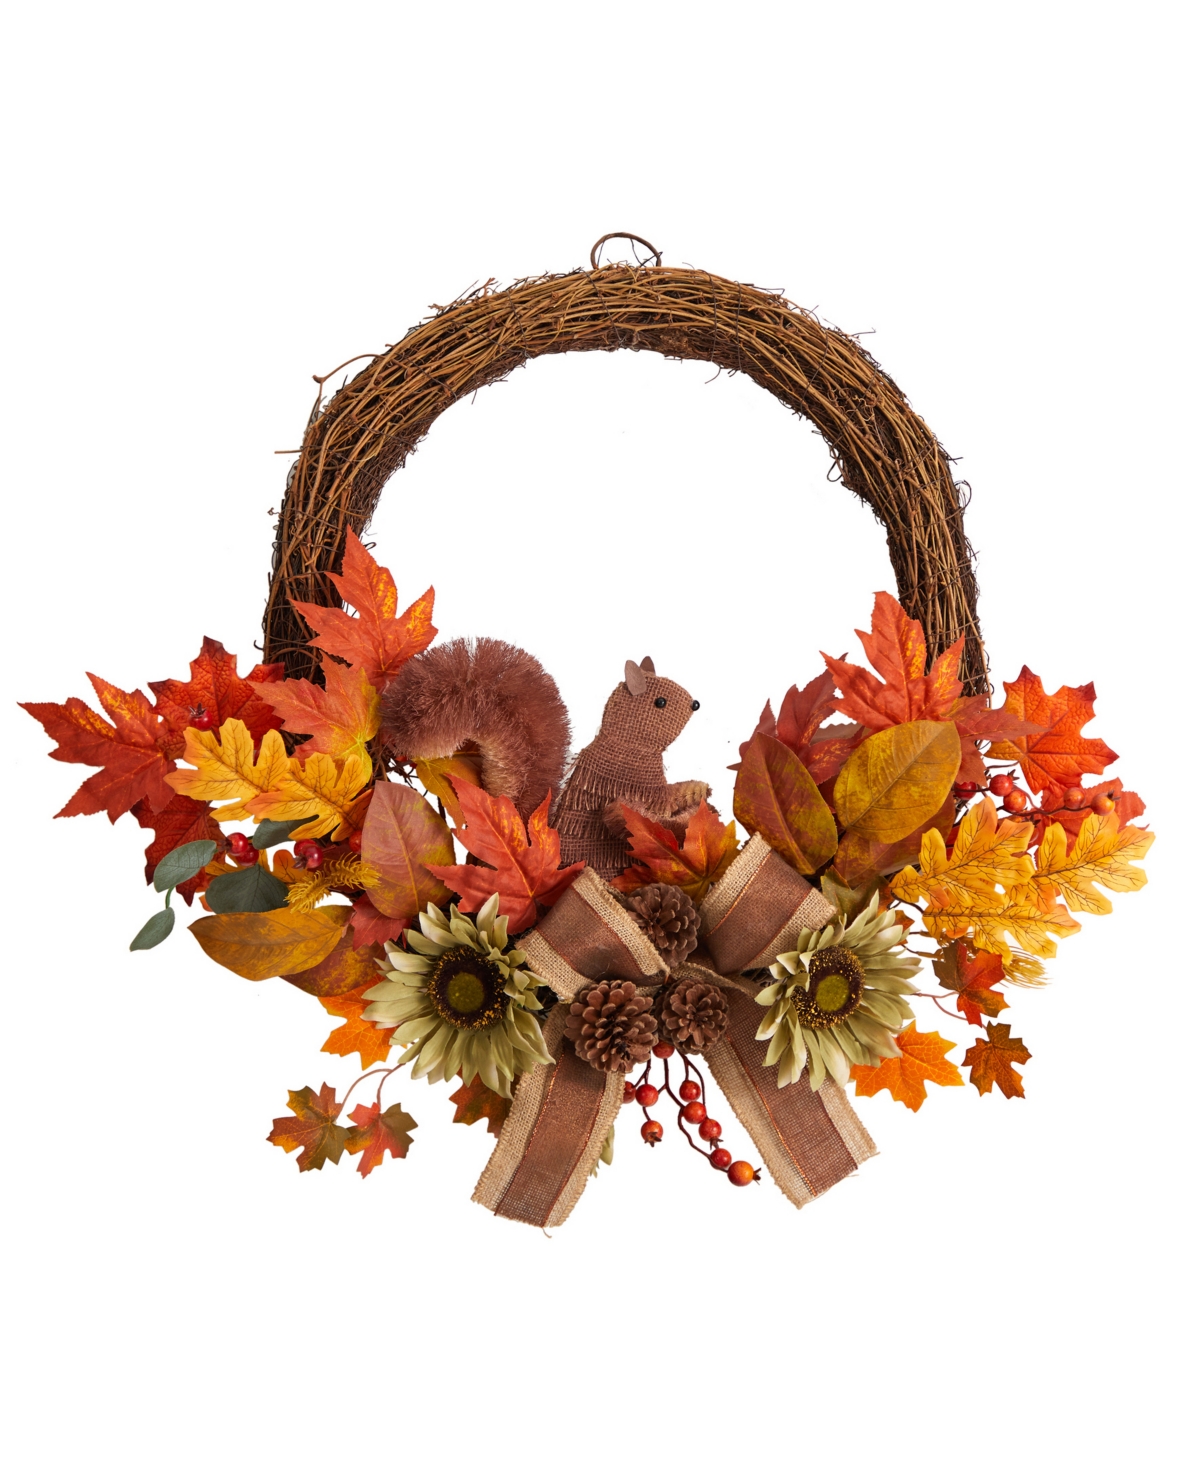 26" Fall Harvest Artificial Autumn Wreath with Twig Base and Bunny - Orange